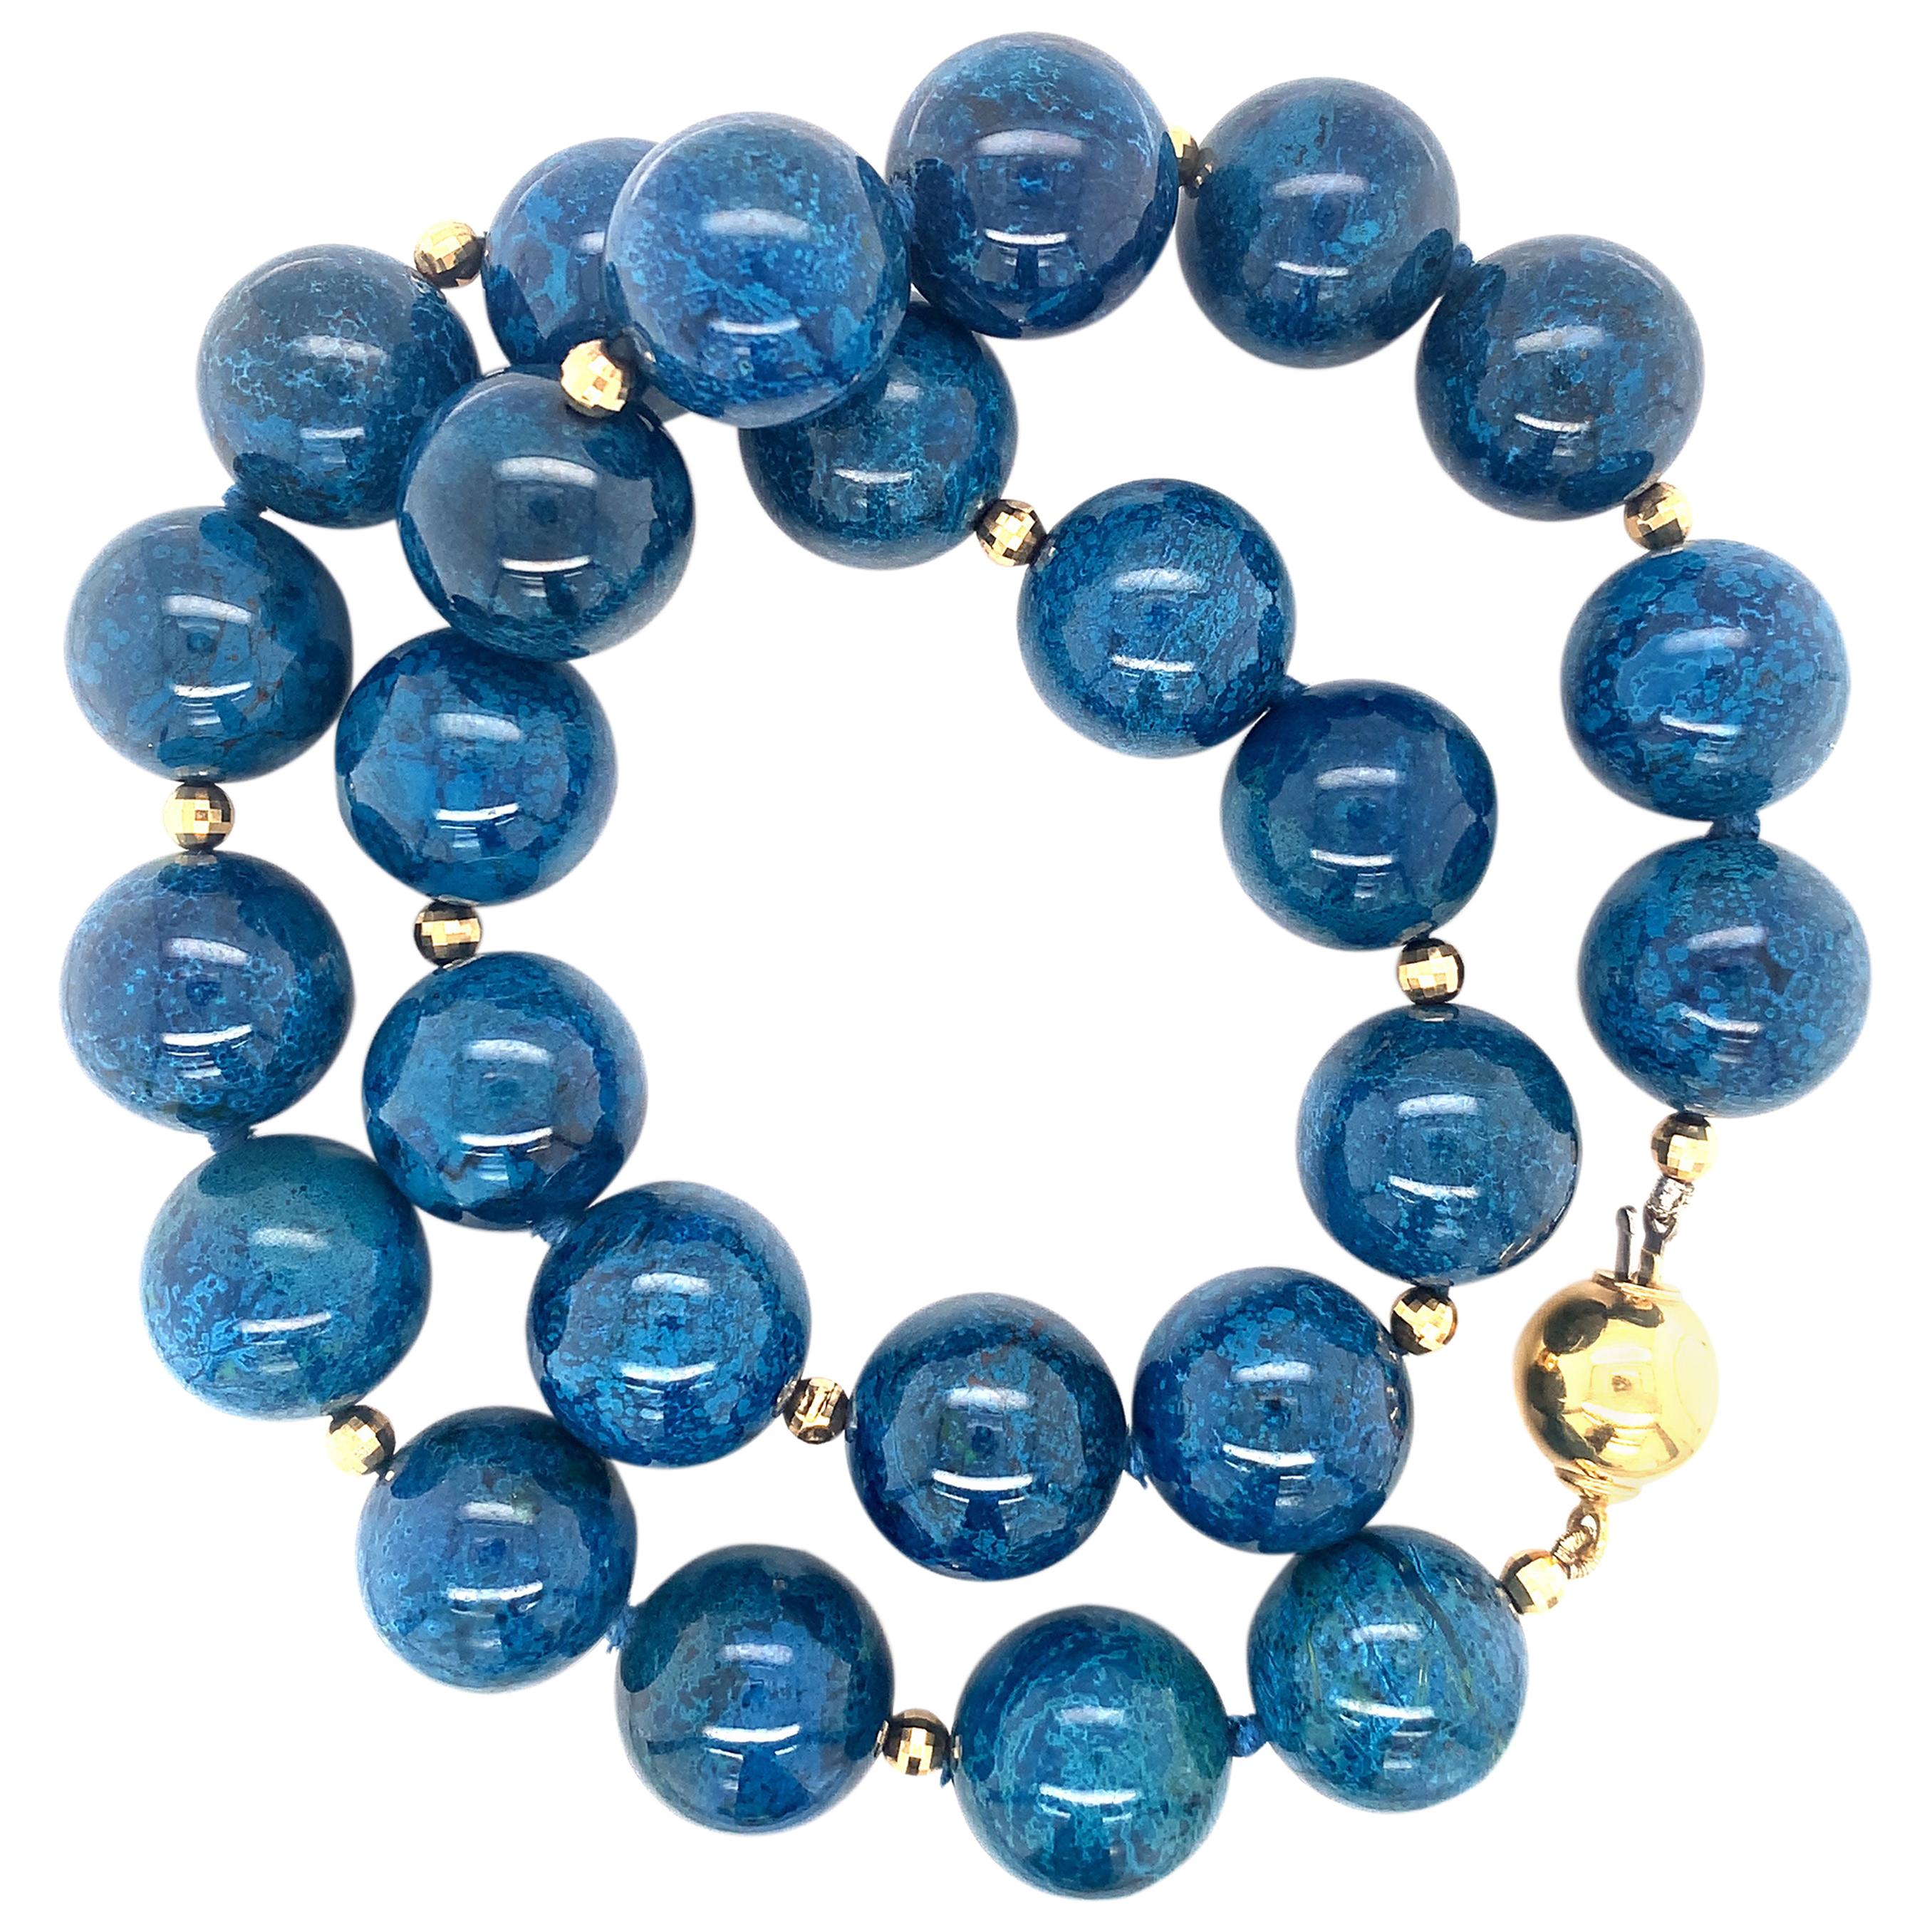 Round Chrysocolla Bead Necklace with Yellow Gold, 202 Grams